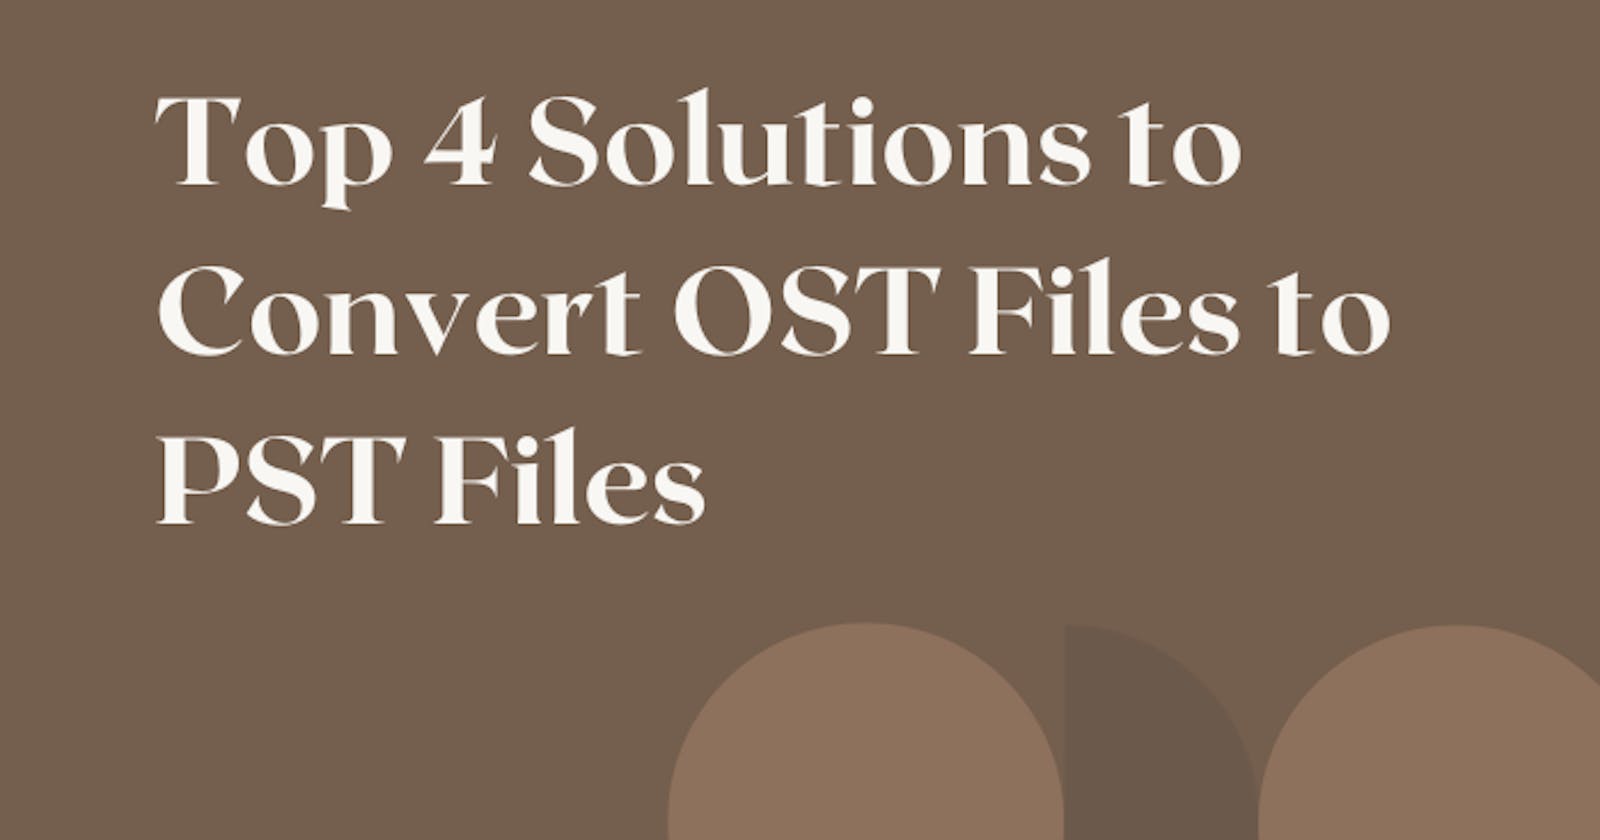 Top 4 Solutions to Convert OST Files to PST Files